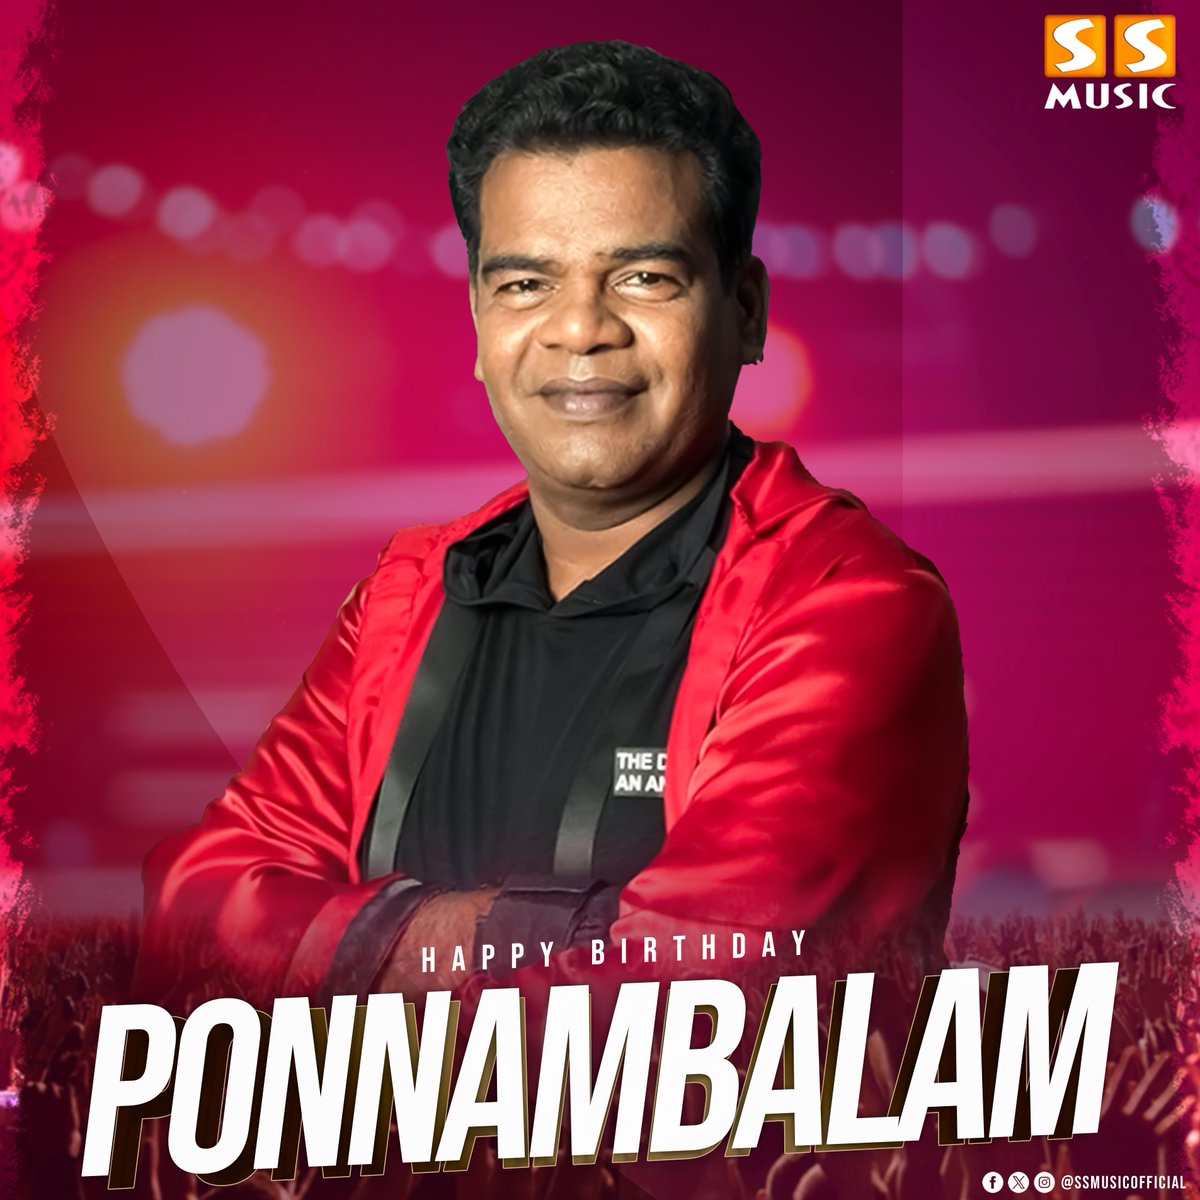 Happy Birthday To The Talented Actor  #Ponnambalam

#HappyBirthdayPonnambalam #HBDPonnambalam #Ponnambalam #ssmusic